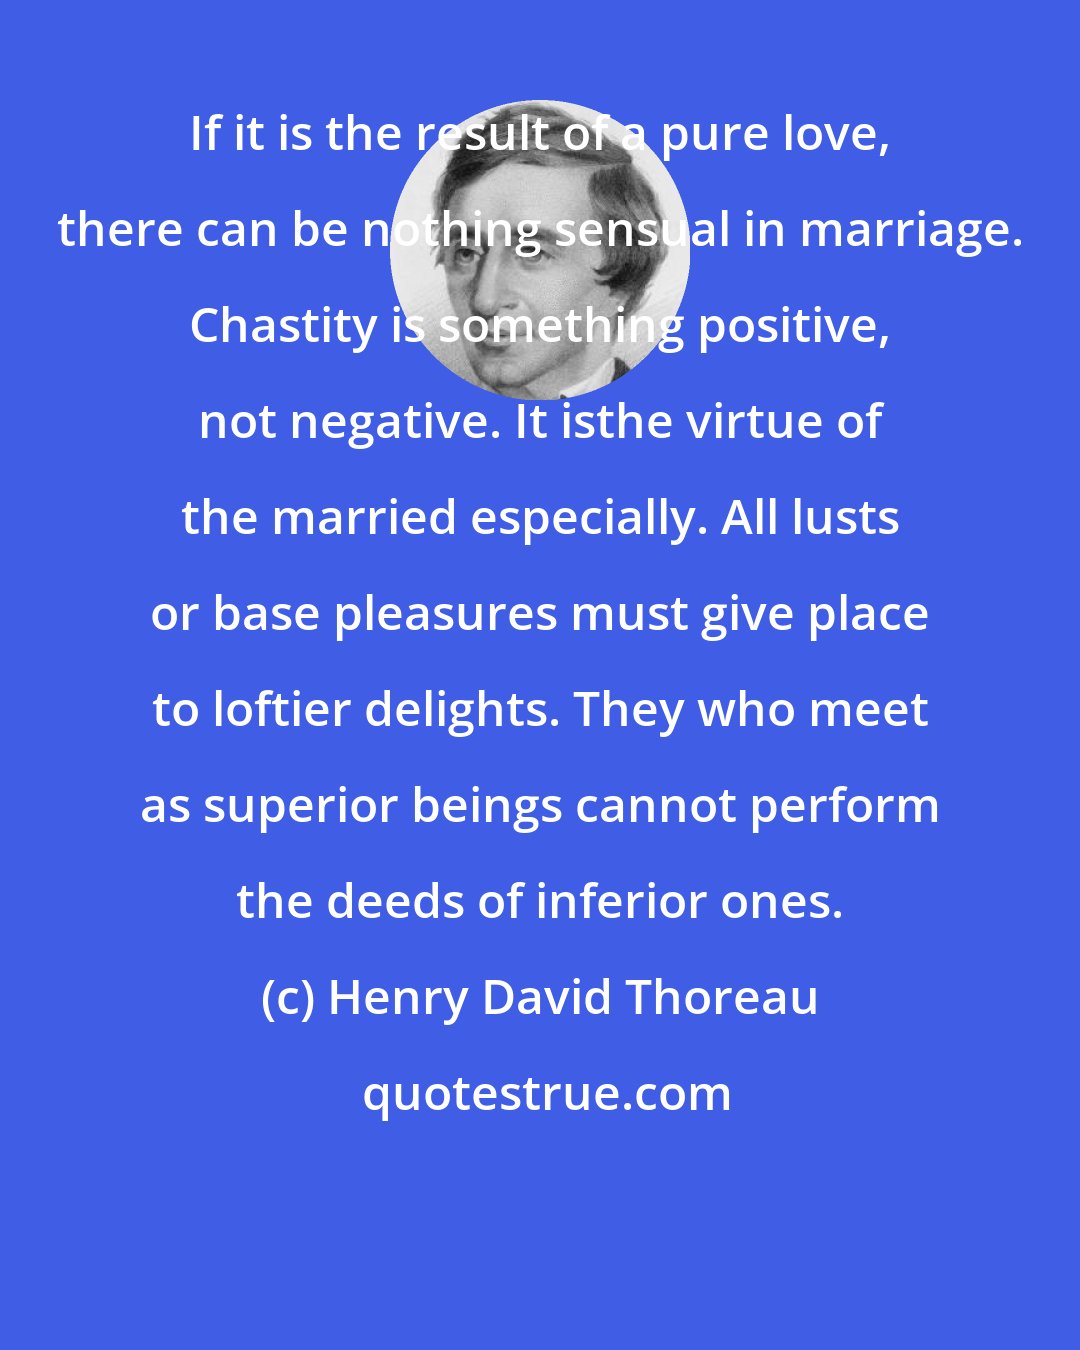 Henry David Thoreau: If it is the result of a pure love, there can be nothing sensual in marriage. Chastity is something positive, not negative. It isthe virtue of the married especially. All lusts or base pleasures must give place to loftier delights. They who meet as superior beings cannot perform the deeds of inferior ones.